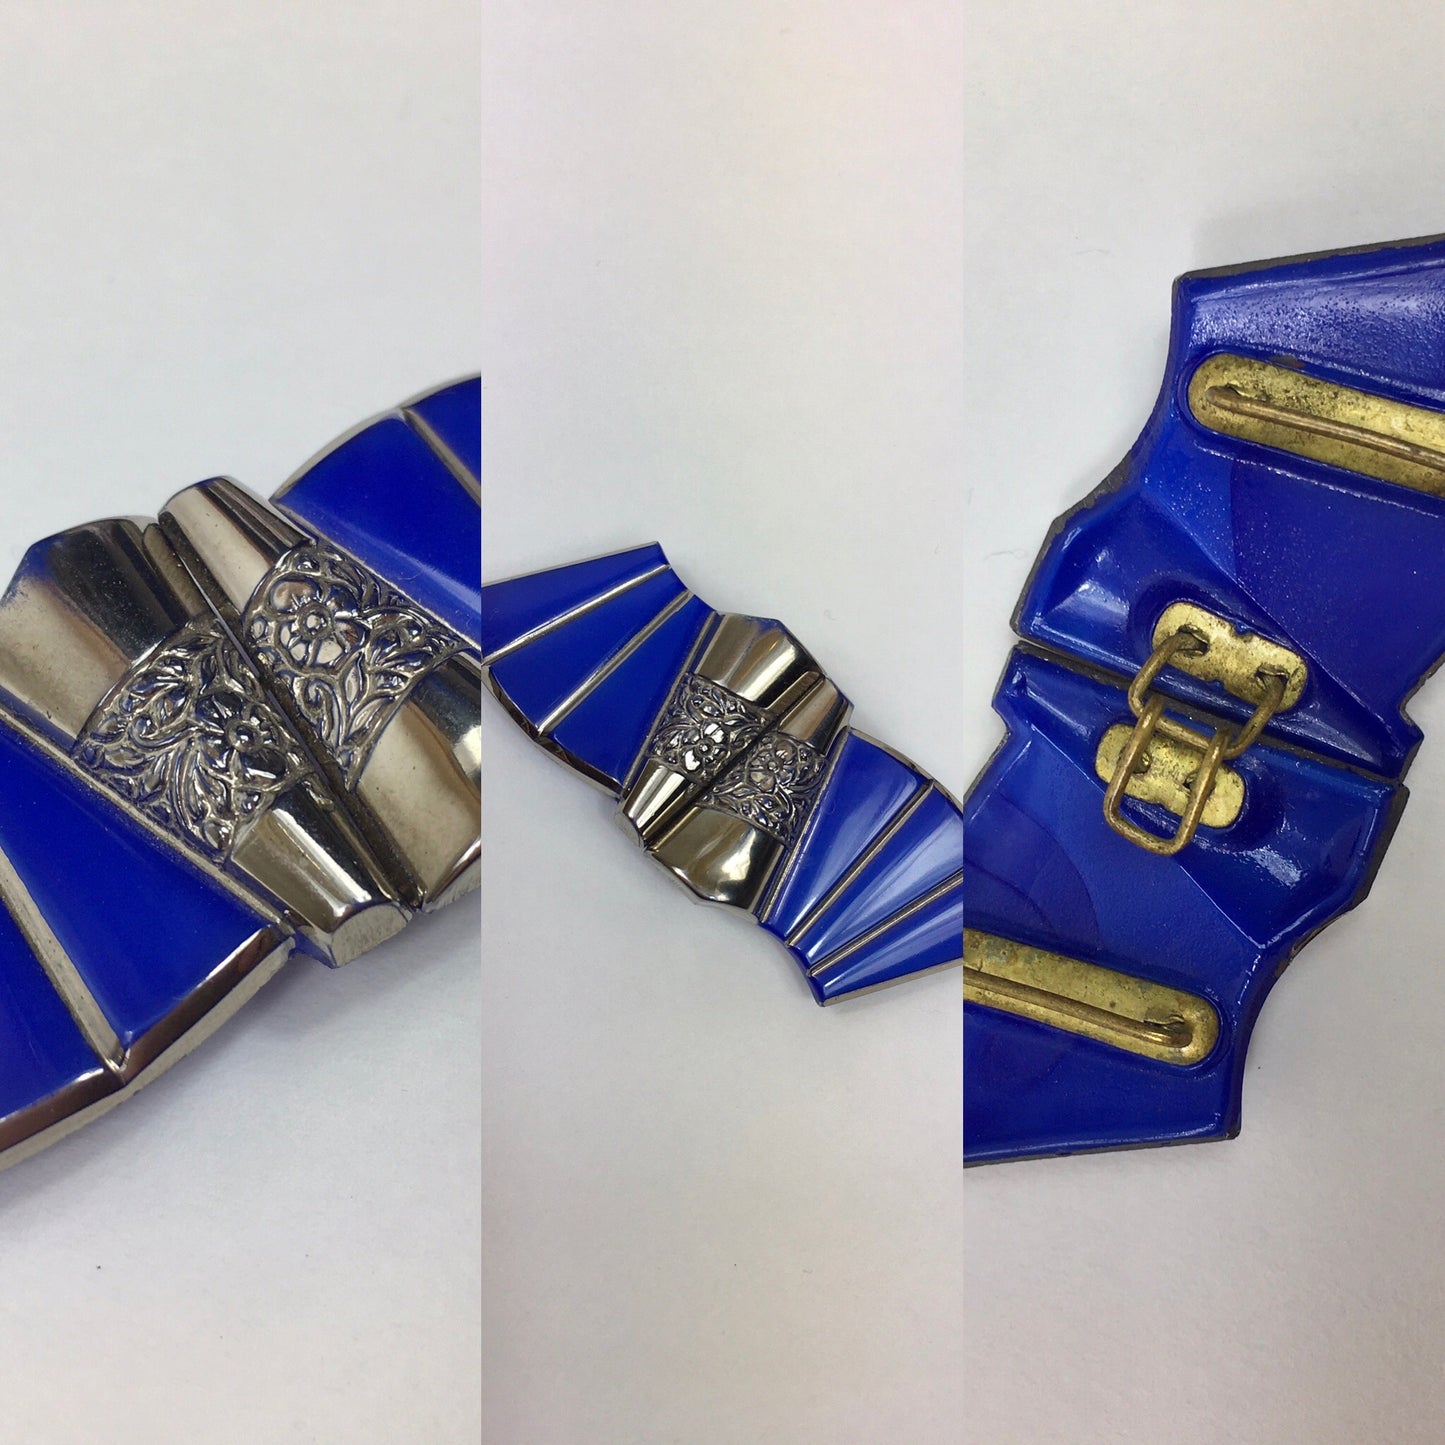 Original 1930’s Glass & Enamel Buckle - In a Beautiful Rich Blue with Deco Detailing